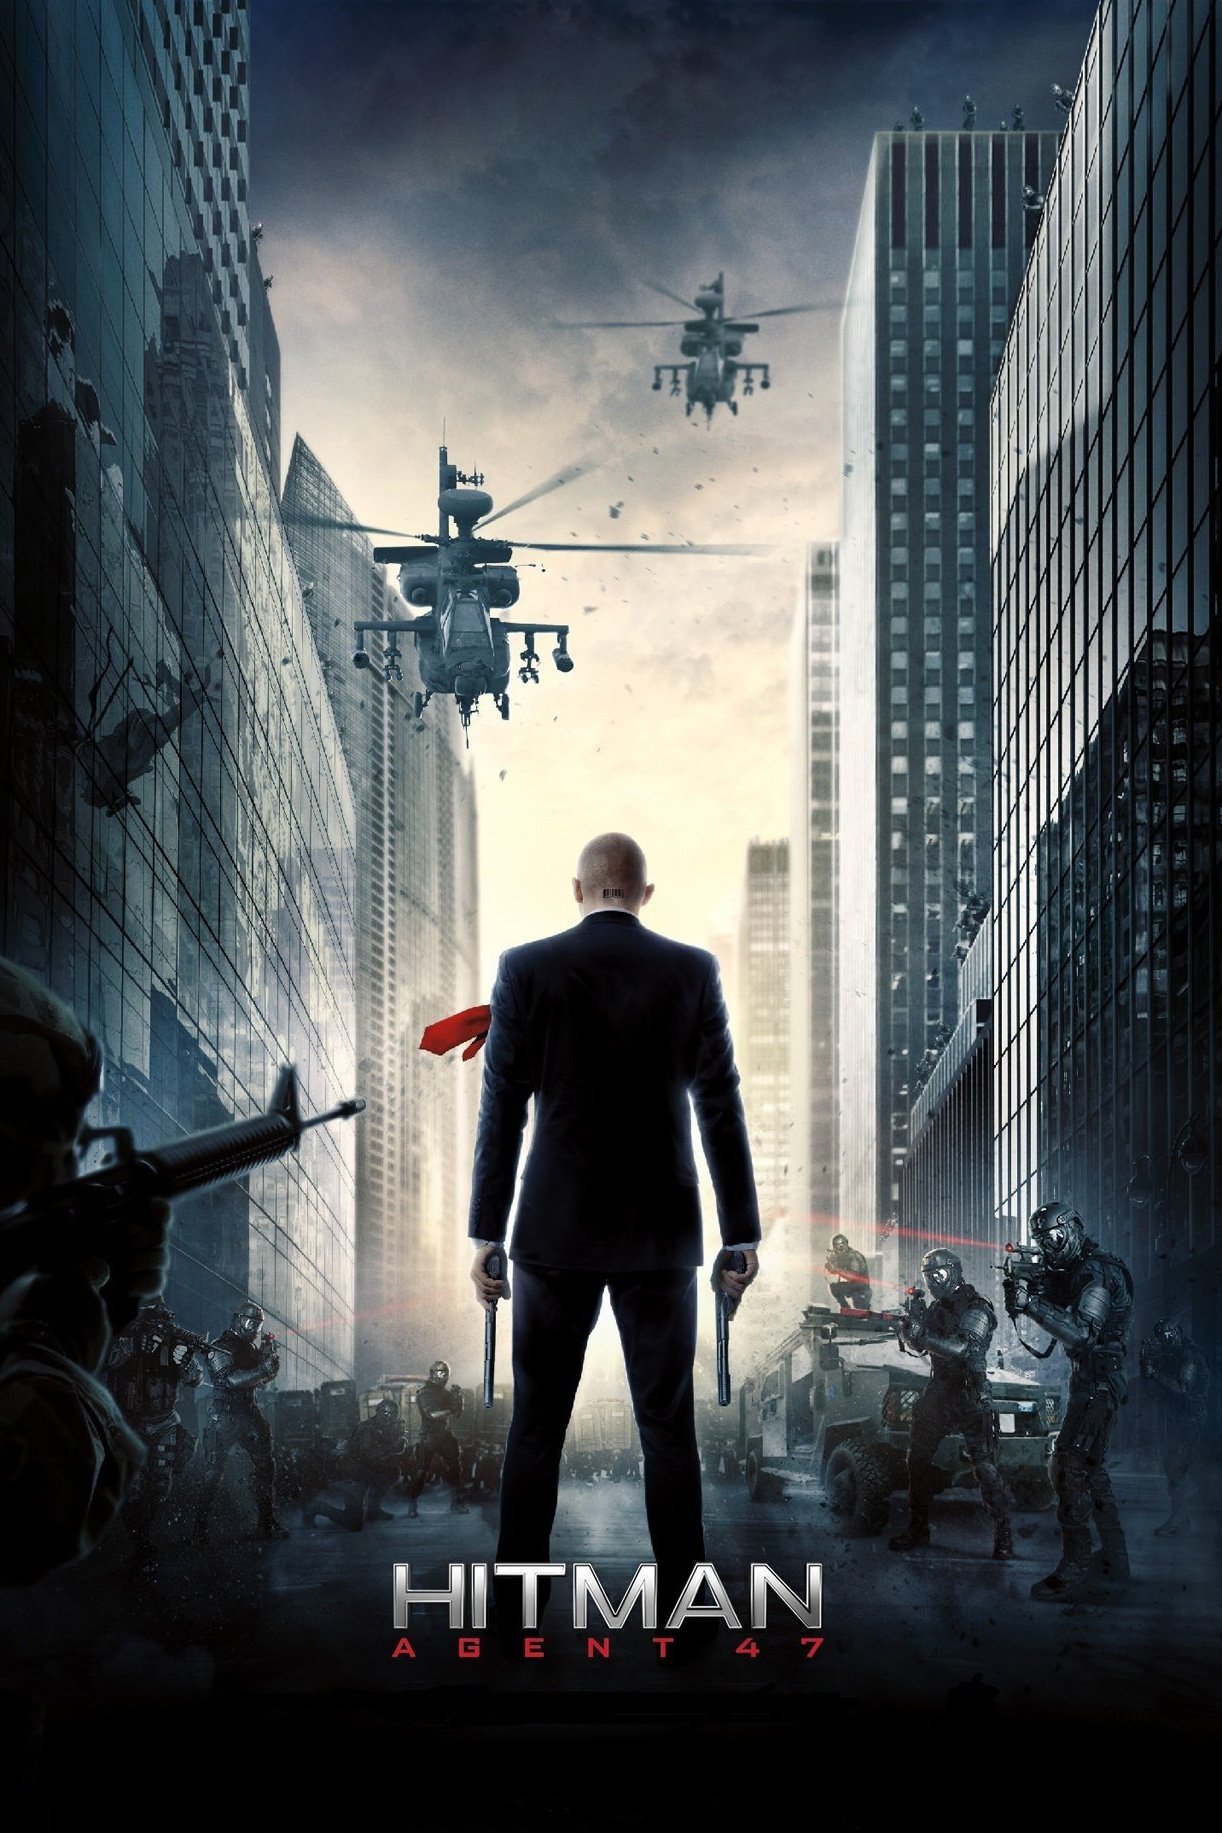 Poster for the movie "Hitman: Agent 47"